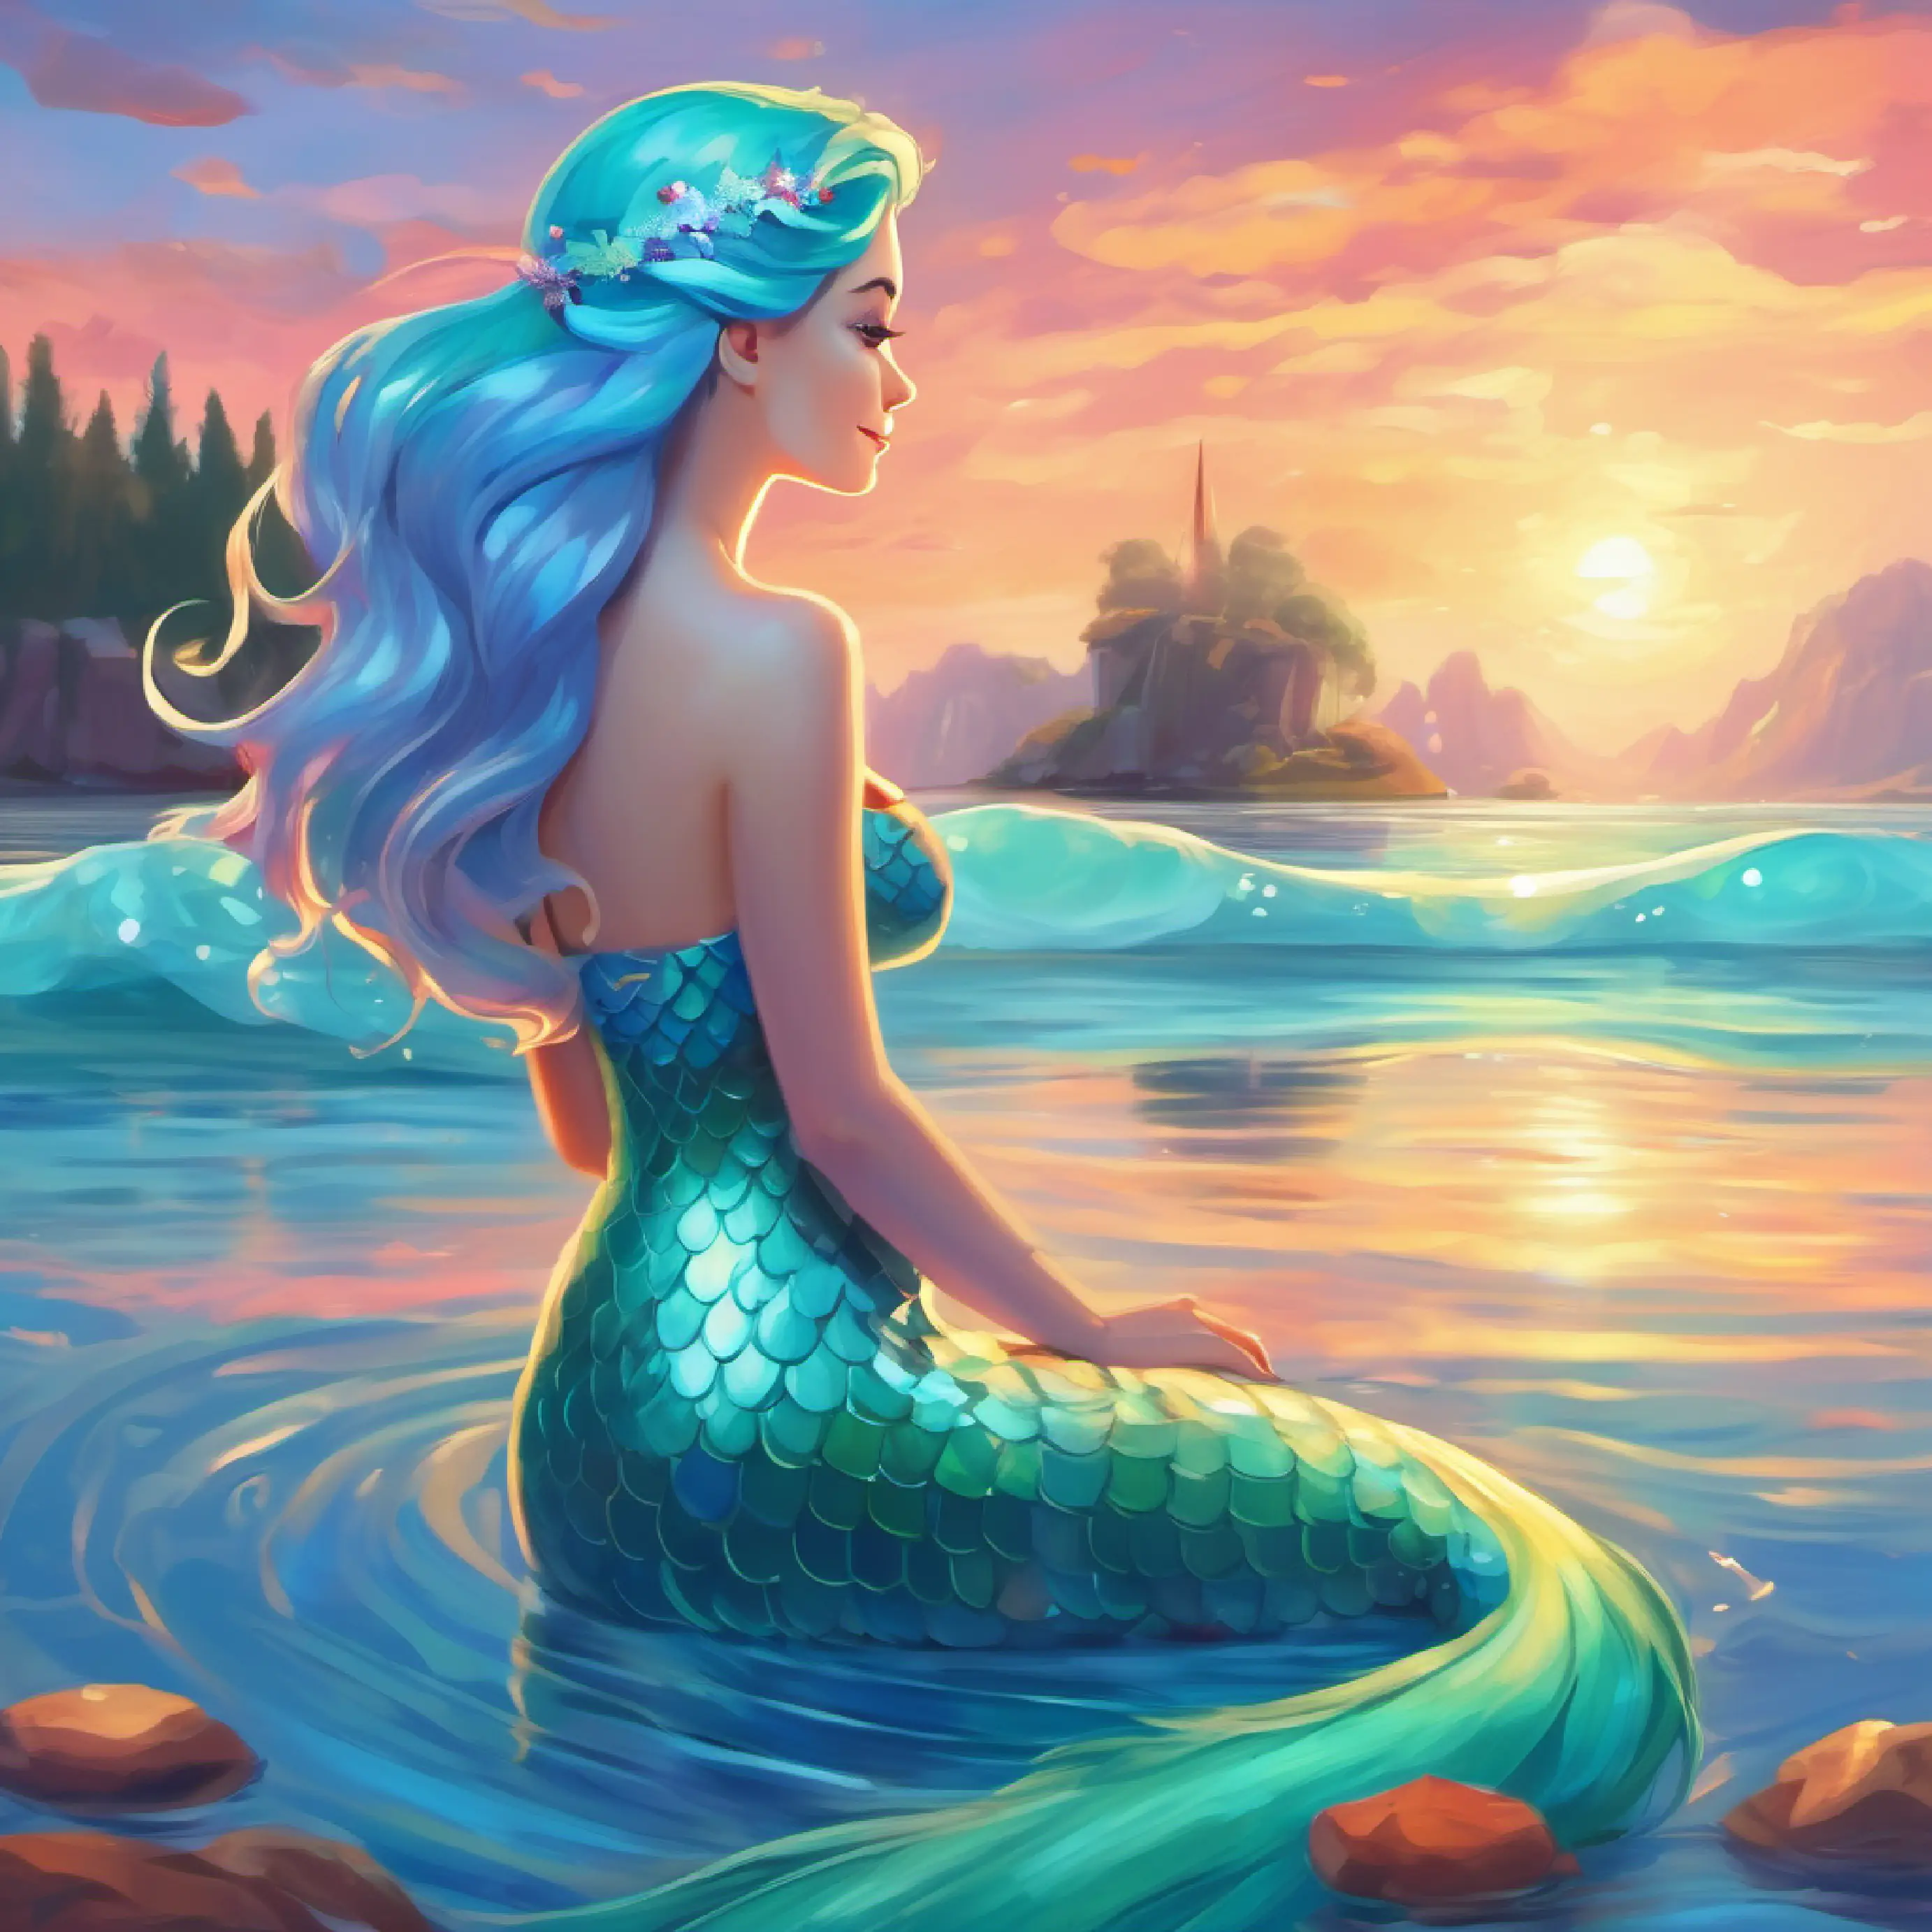 Mermaid princess with sky-blue tail and long aqua hair sees her reflection and wants to share her joy.